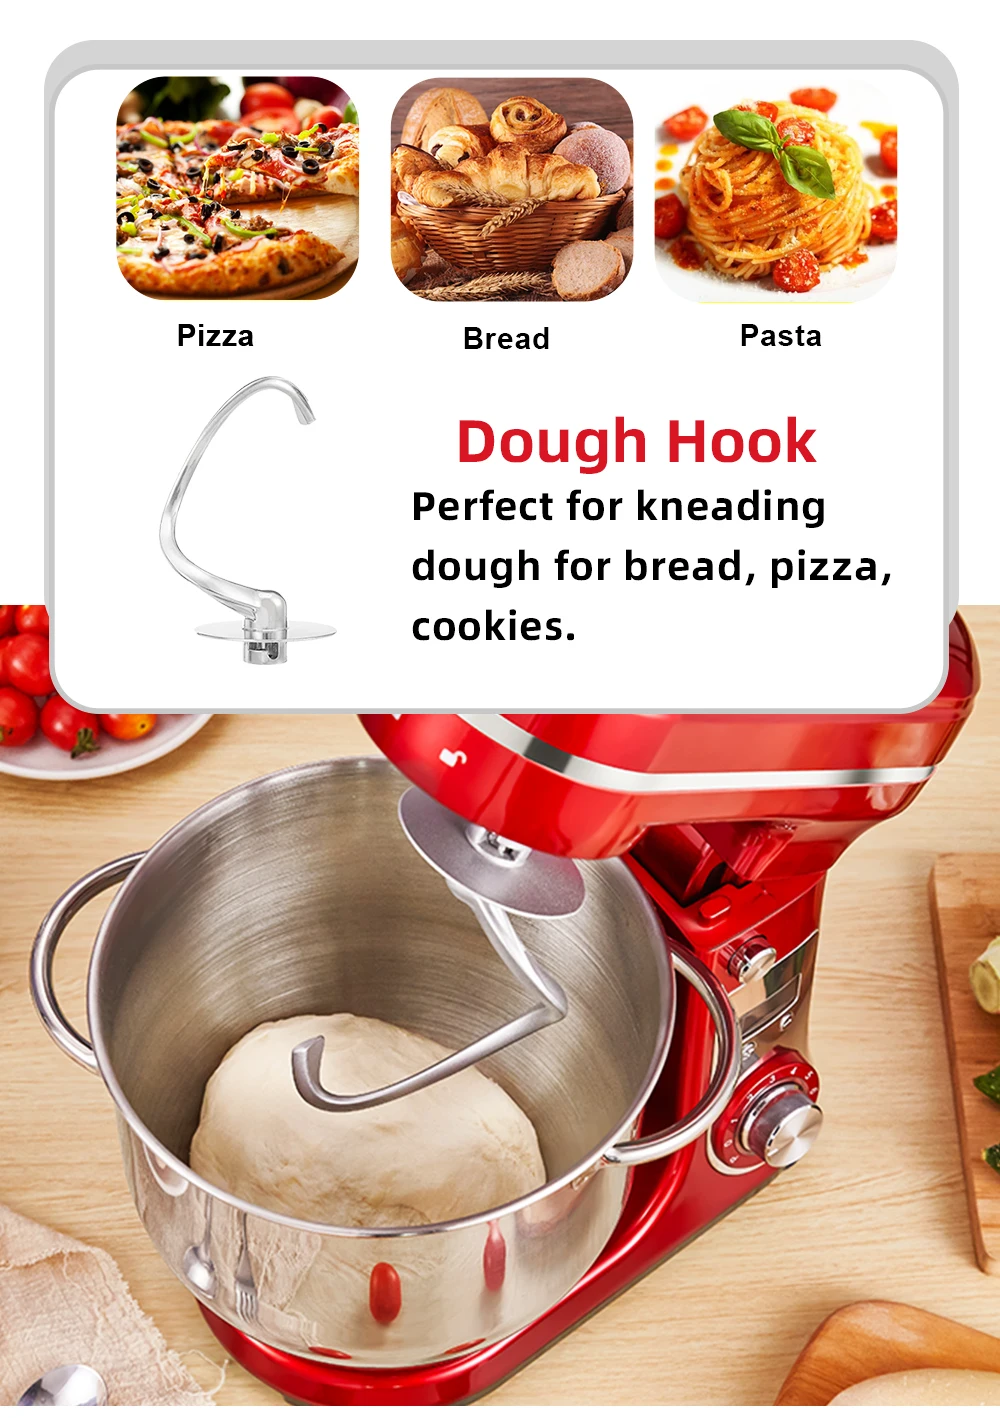 6L stand mixer with dough hook